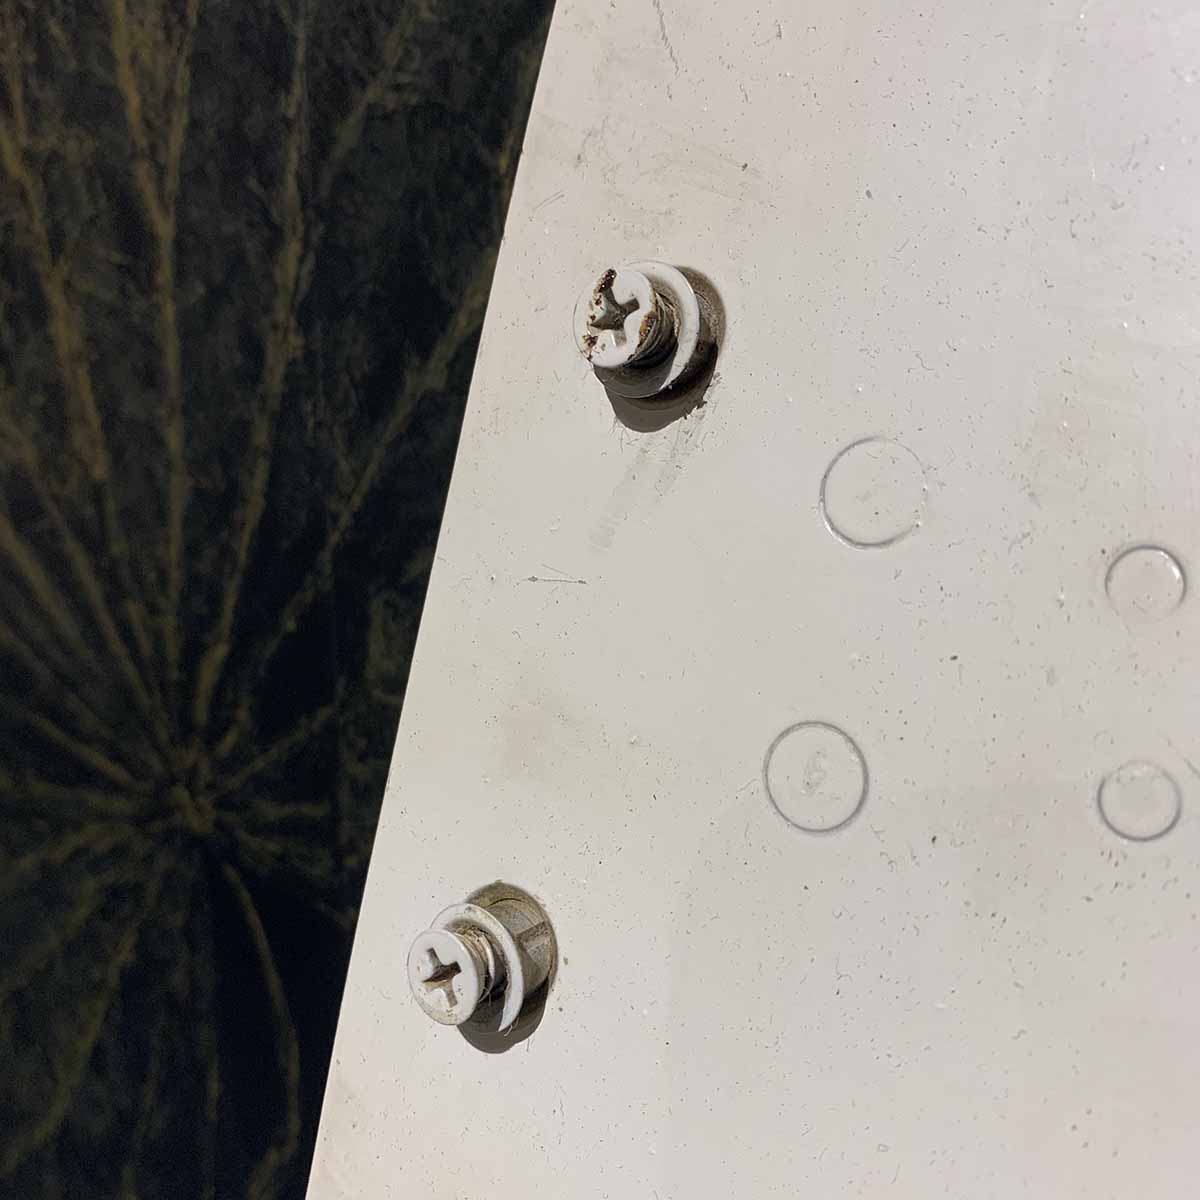 Detail of screws on access panel of a Vought F-8 Crusader.